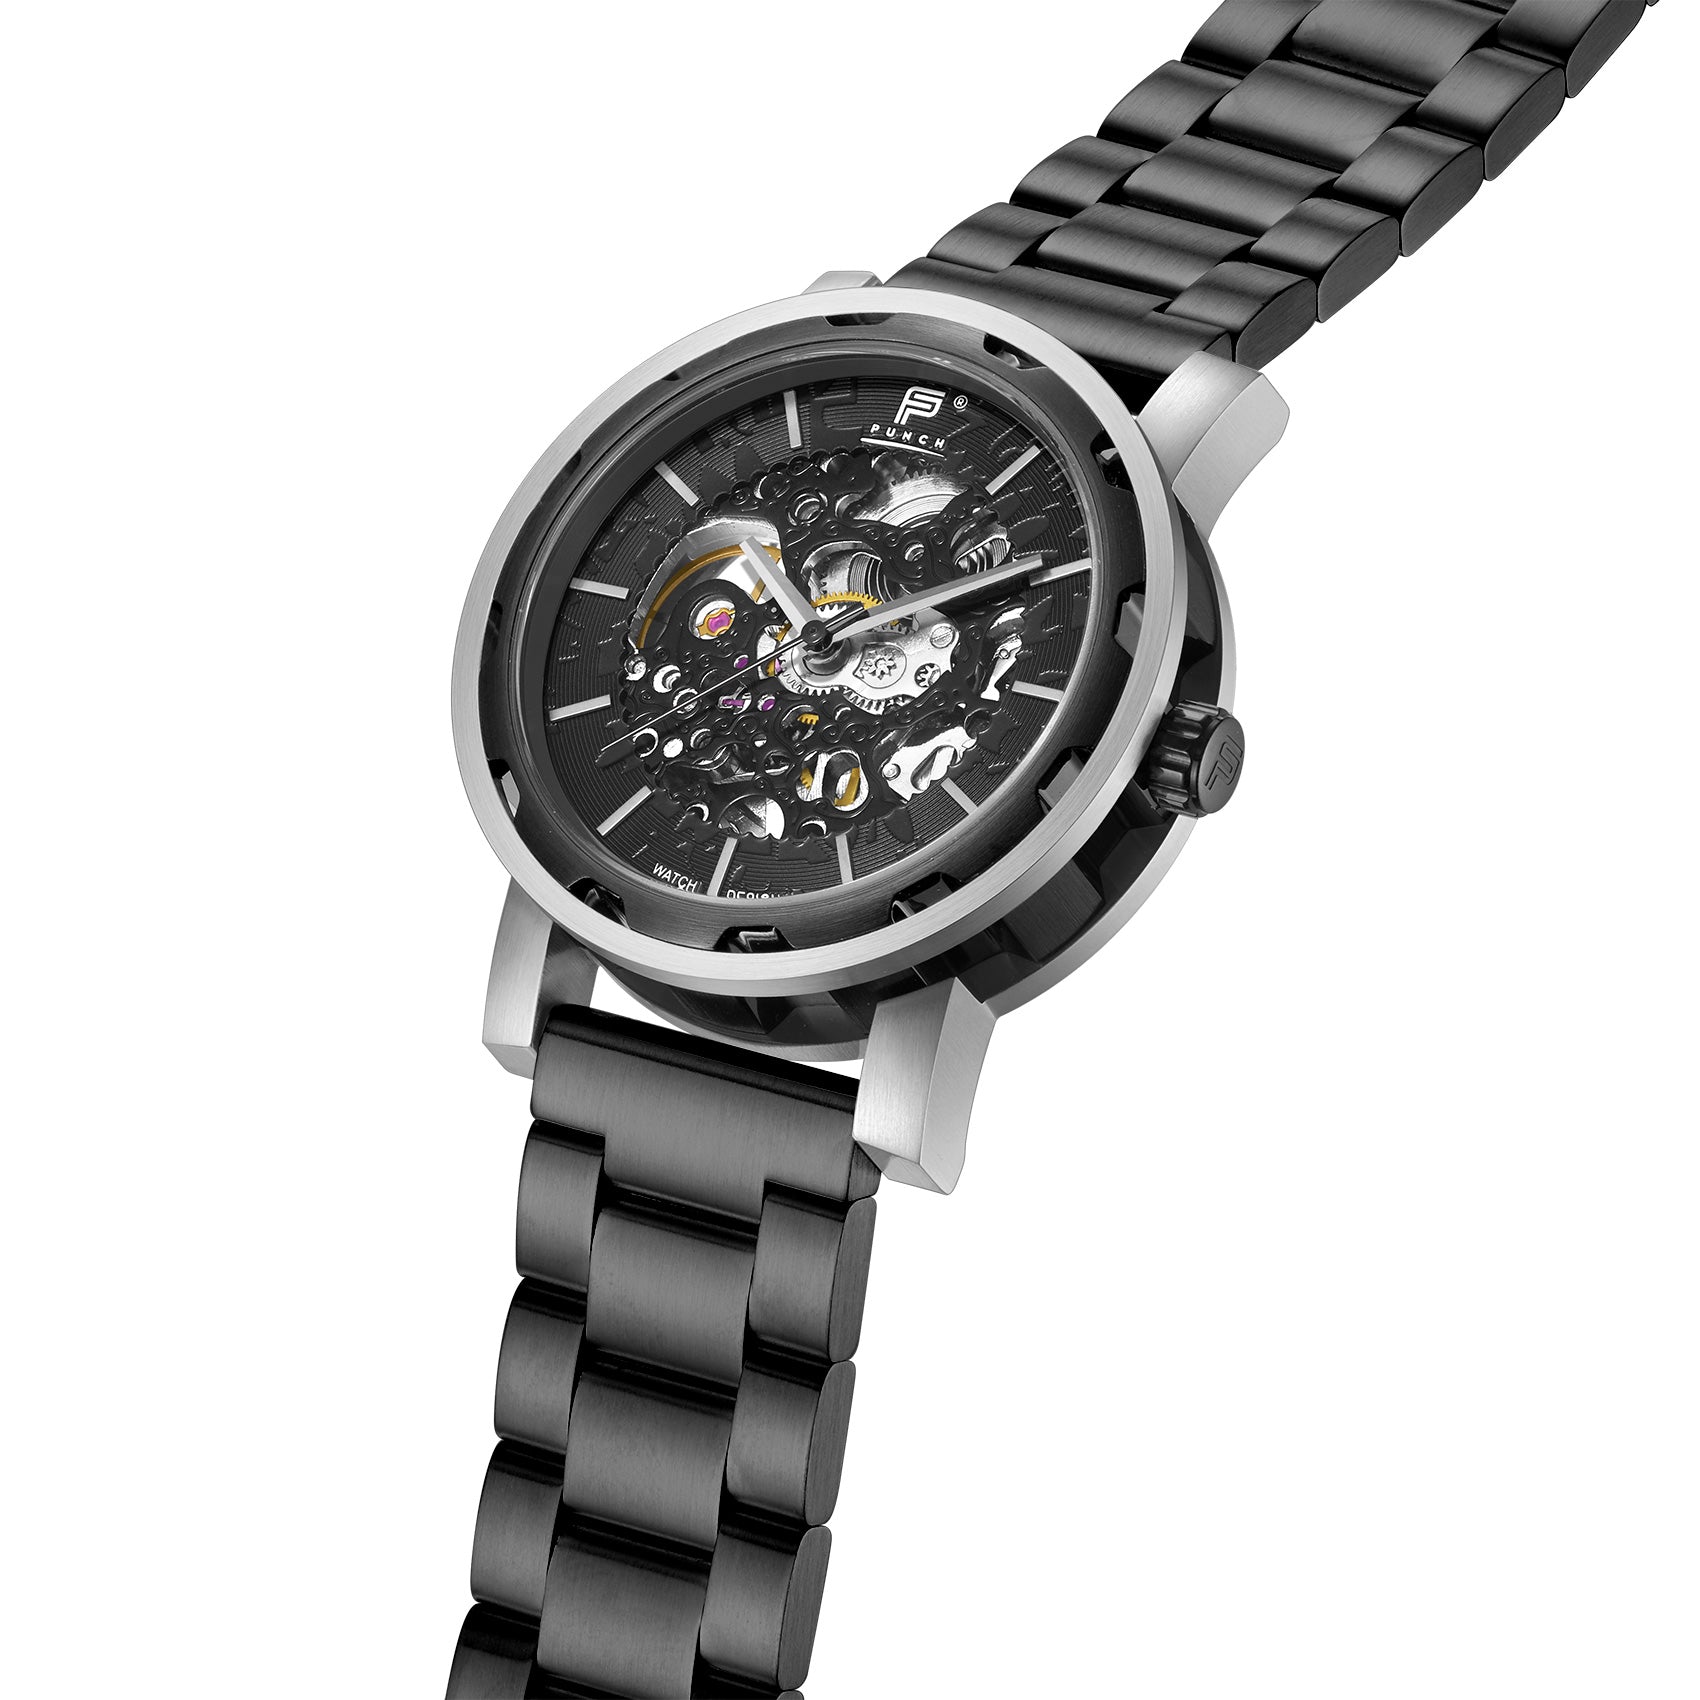 Men's Silver Automatic Skeleton Watch with Black Face and black Metal Link Stainless Steel Strap - Side View